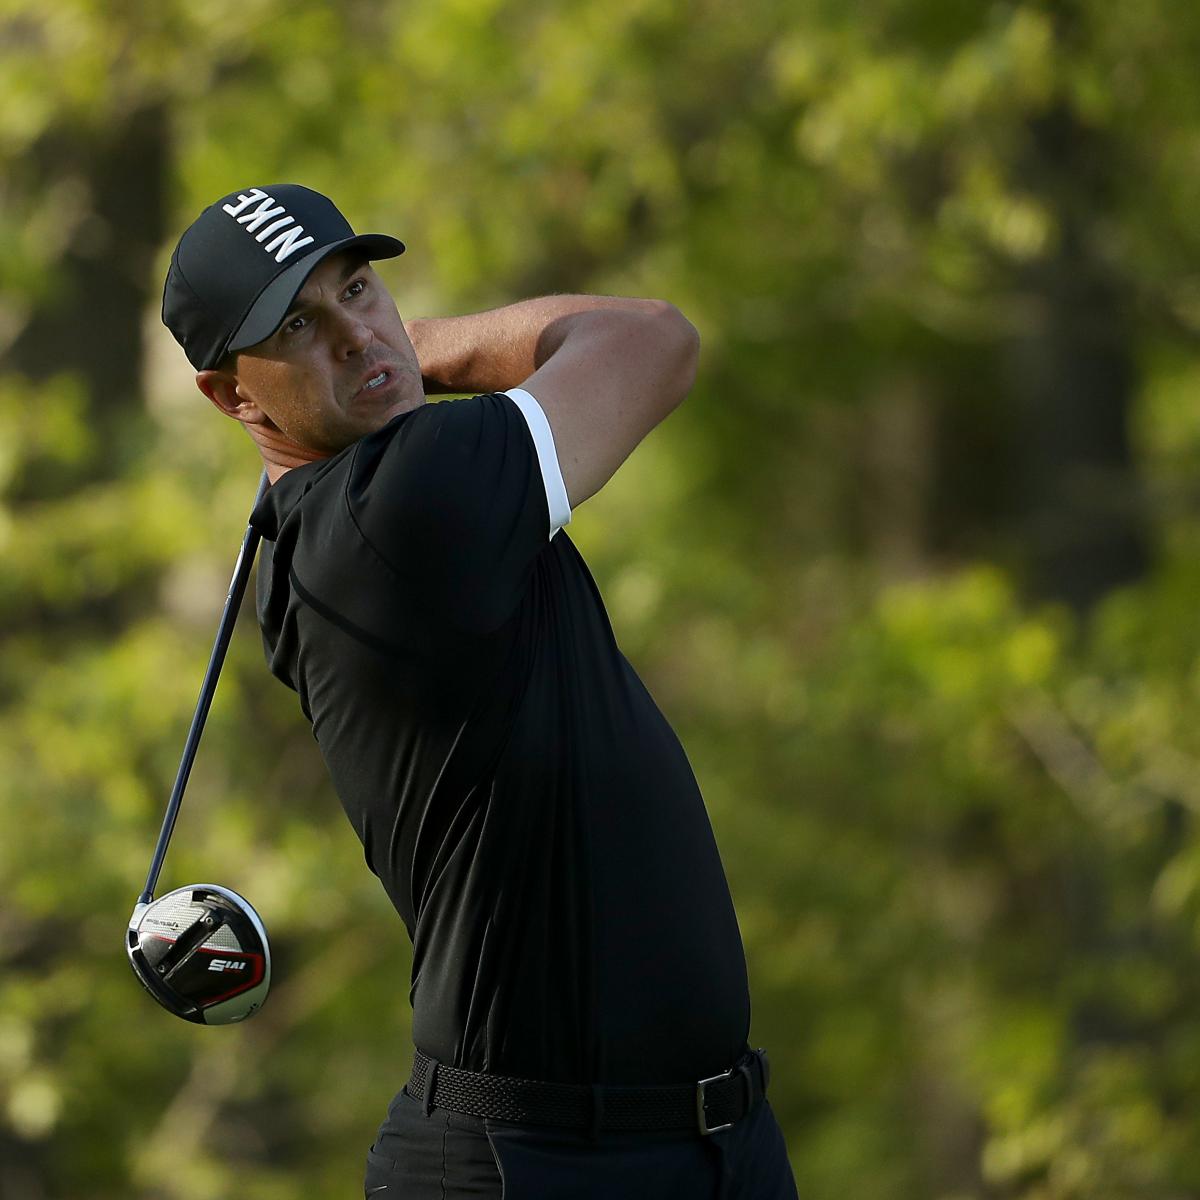 PGA Championship 2019 Leaderboard Live Updates, Storylines to Watch